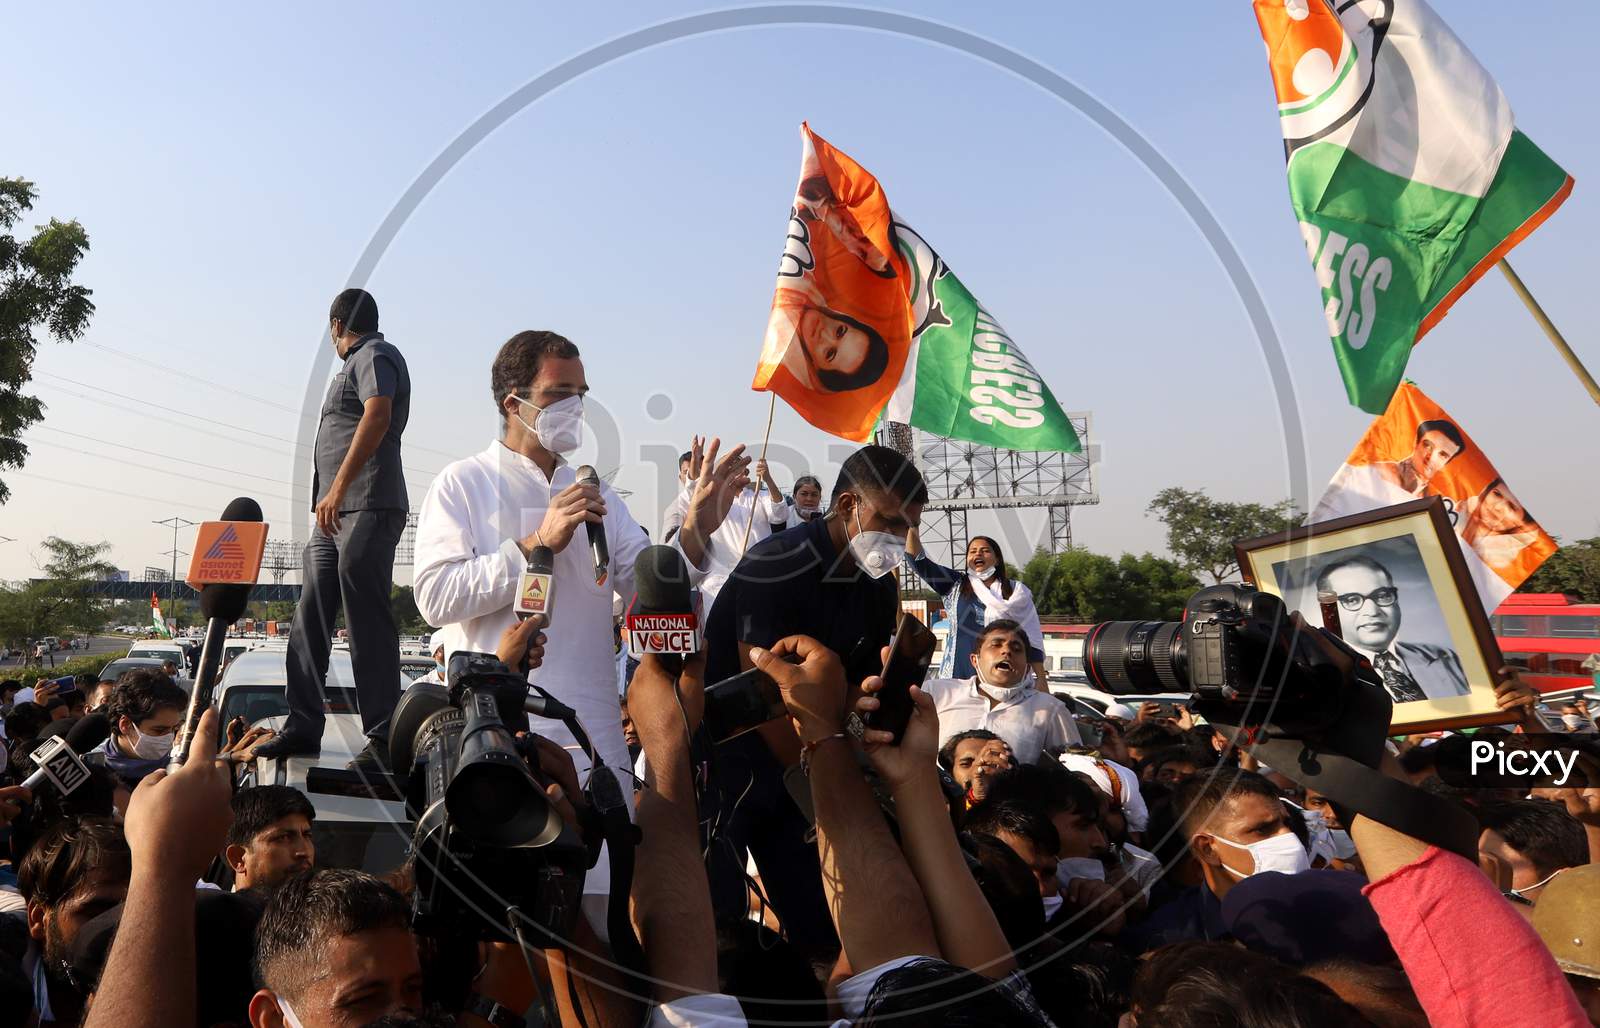 Rahul Gandhi, leader of Congress party, addresses his party workers at Delhi-Noida border during a protest after the death of a rape victim, in Noida, India, October 3, 2020.